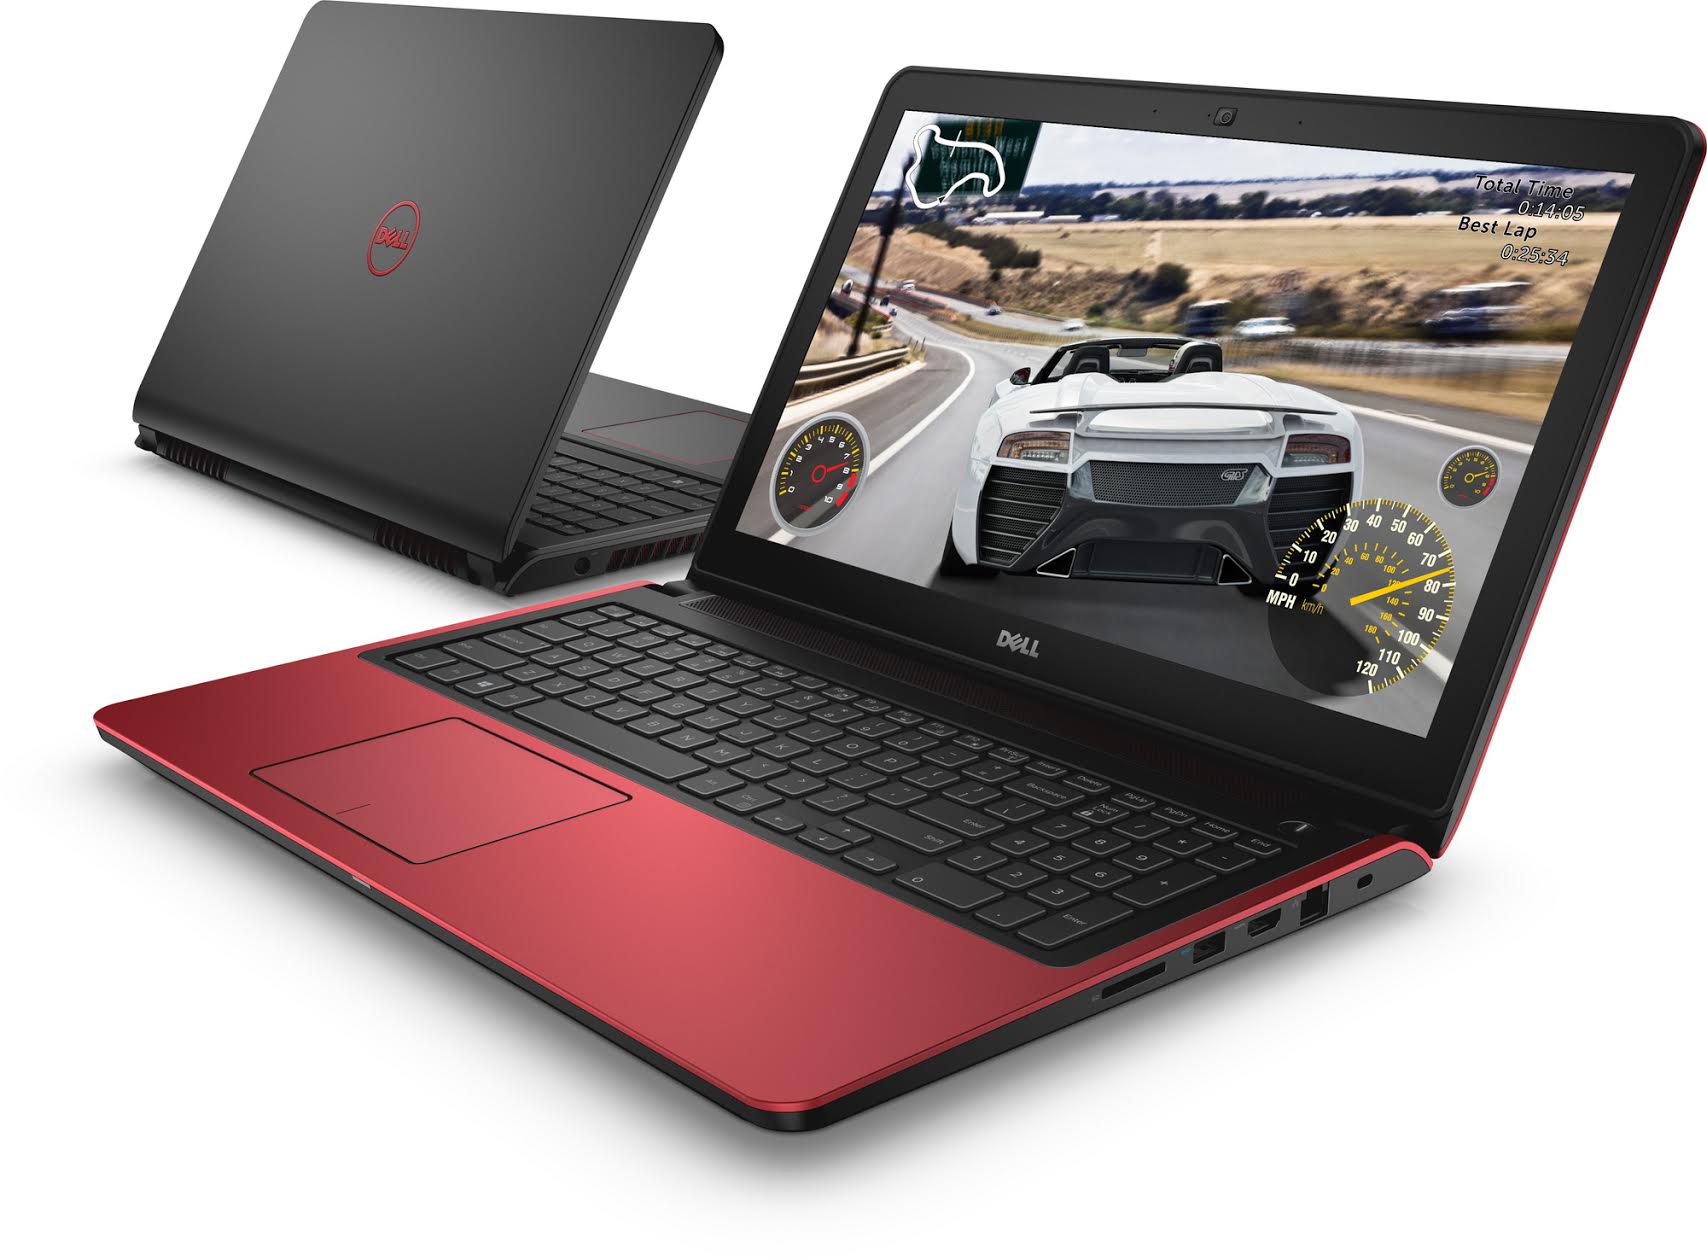 Dell 7559 – A Perfect Budget Gaming Laptop For Nepalese?